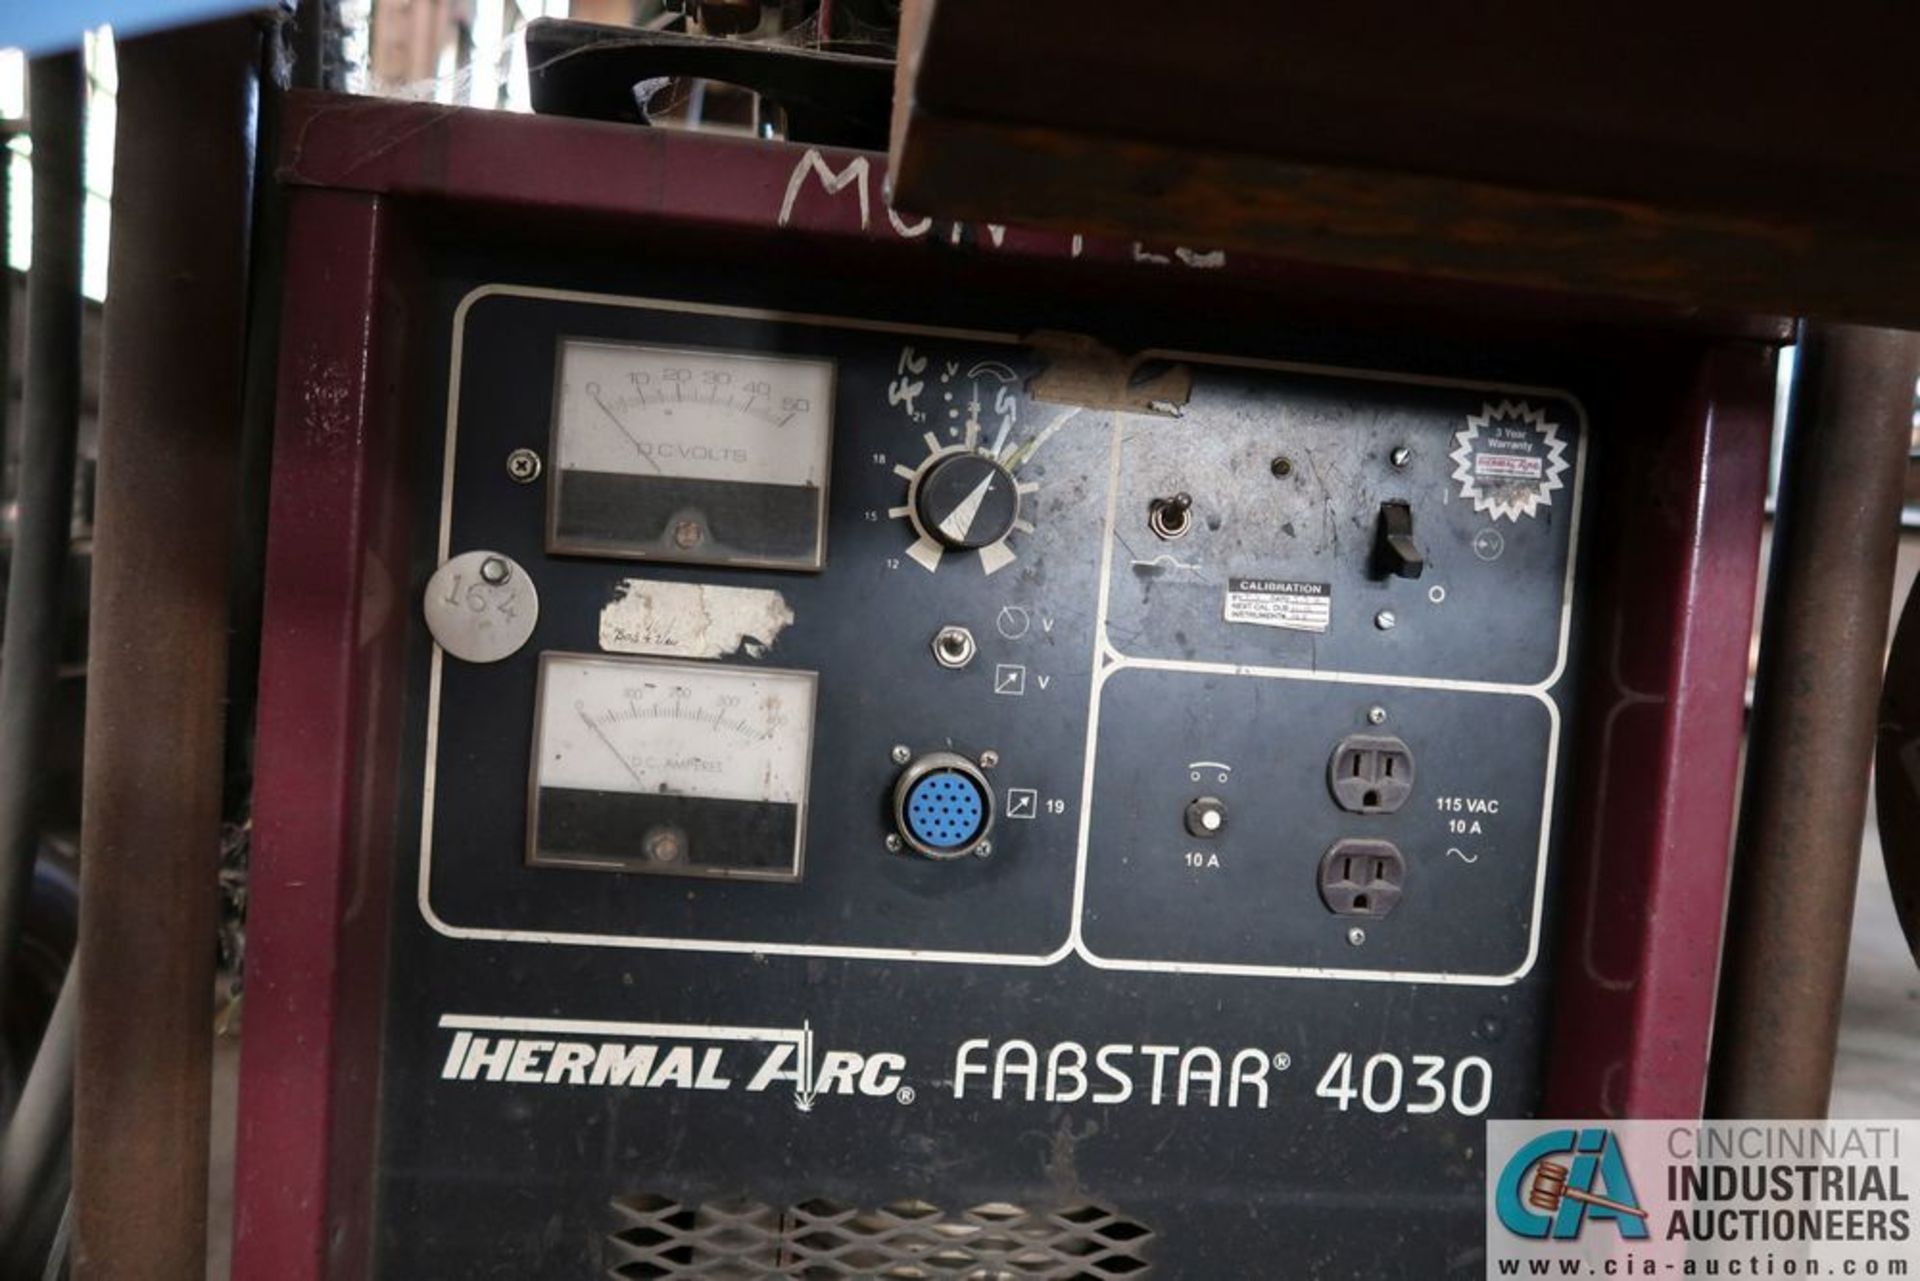 400 AMP THERMAL ARC FABSTAR 4030 WELDER WITH THERMAL ARC 2410 WIRE FEED - Image 2 of 3